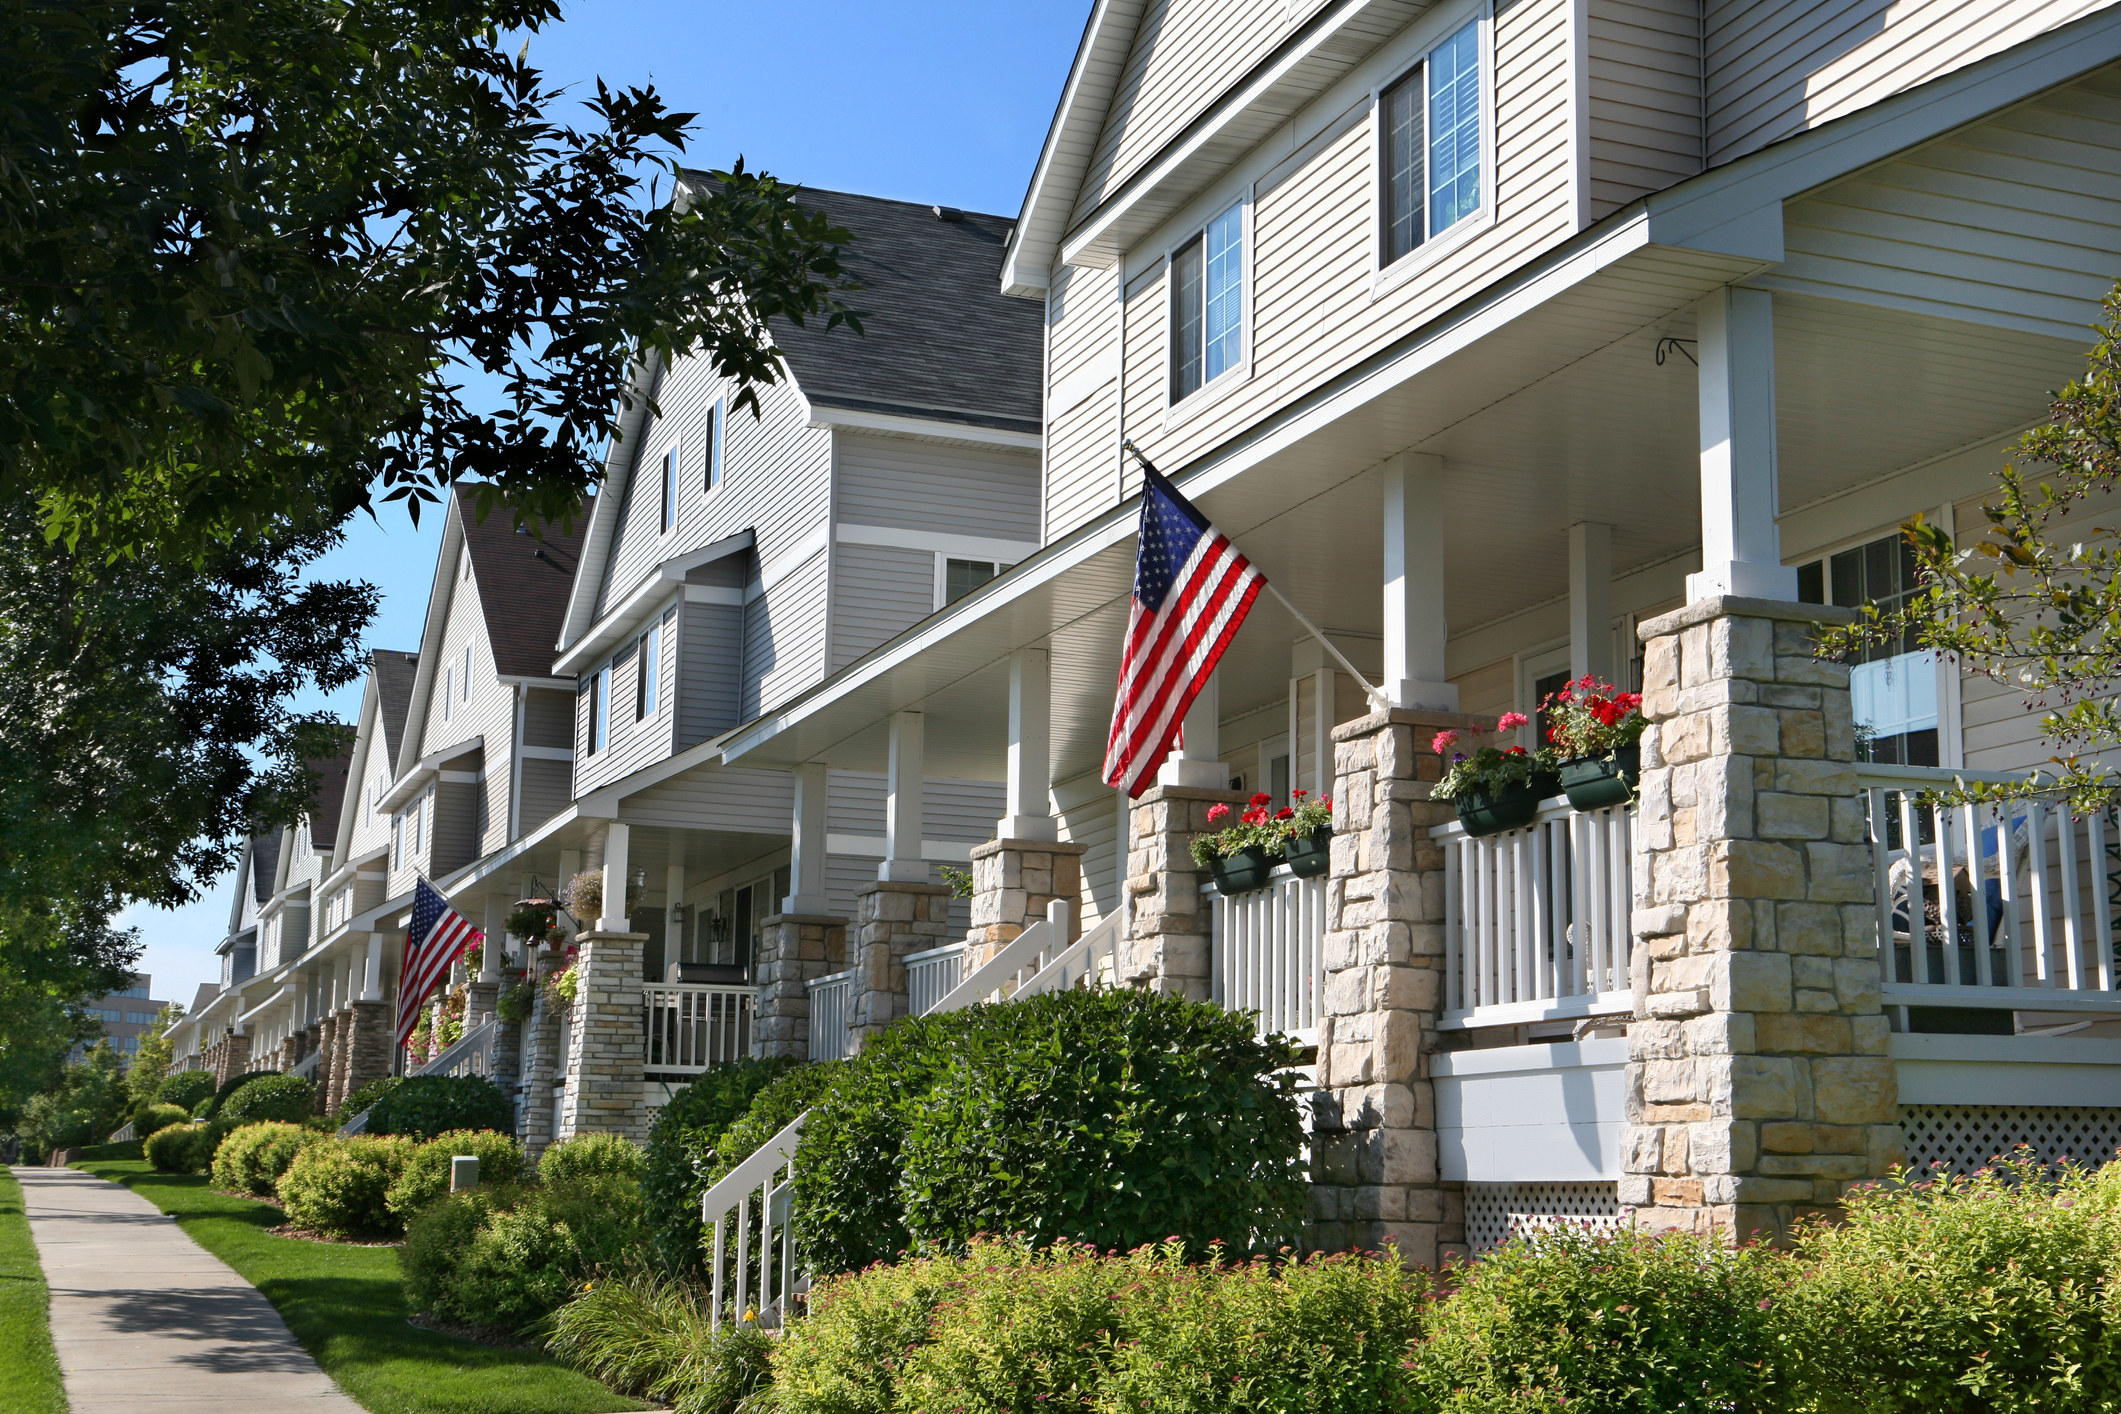 A row of townhouses with American flags flying.